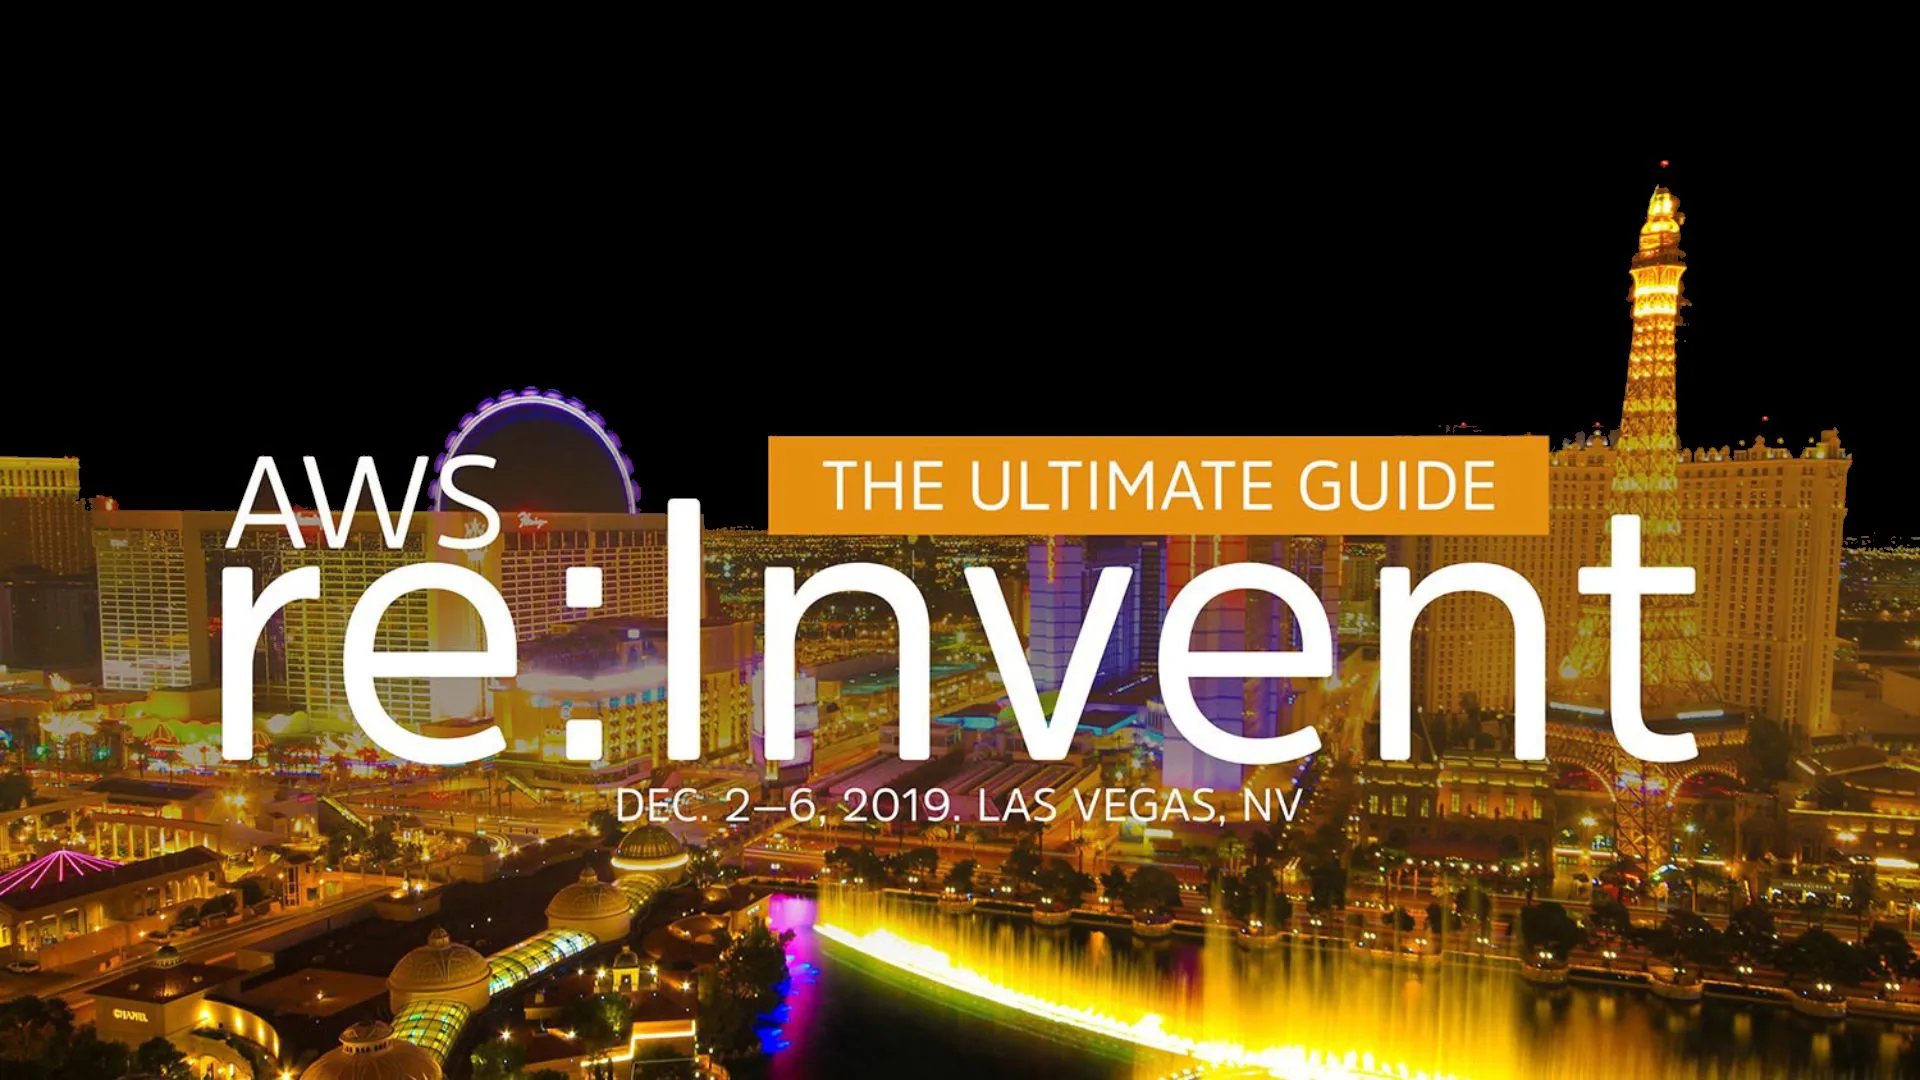 The Ultimate Guide to AWS re:Invent 2019